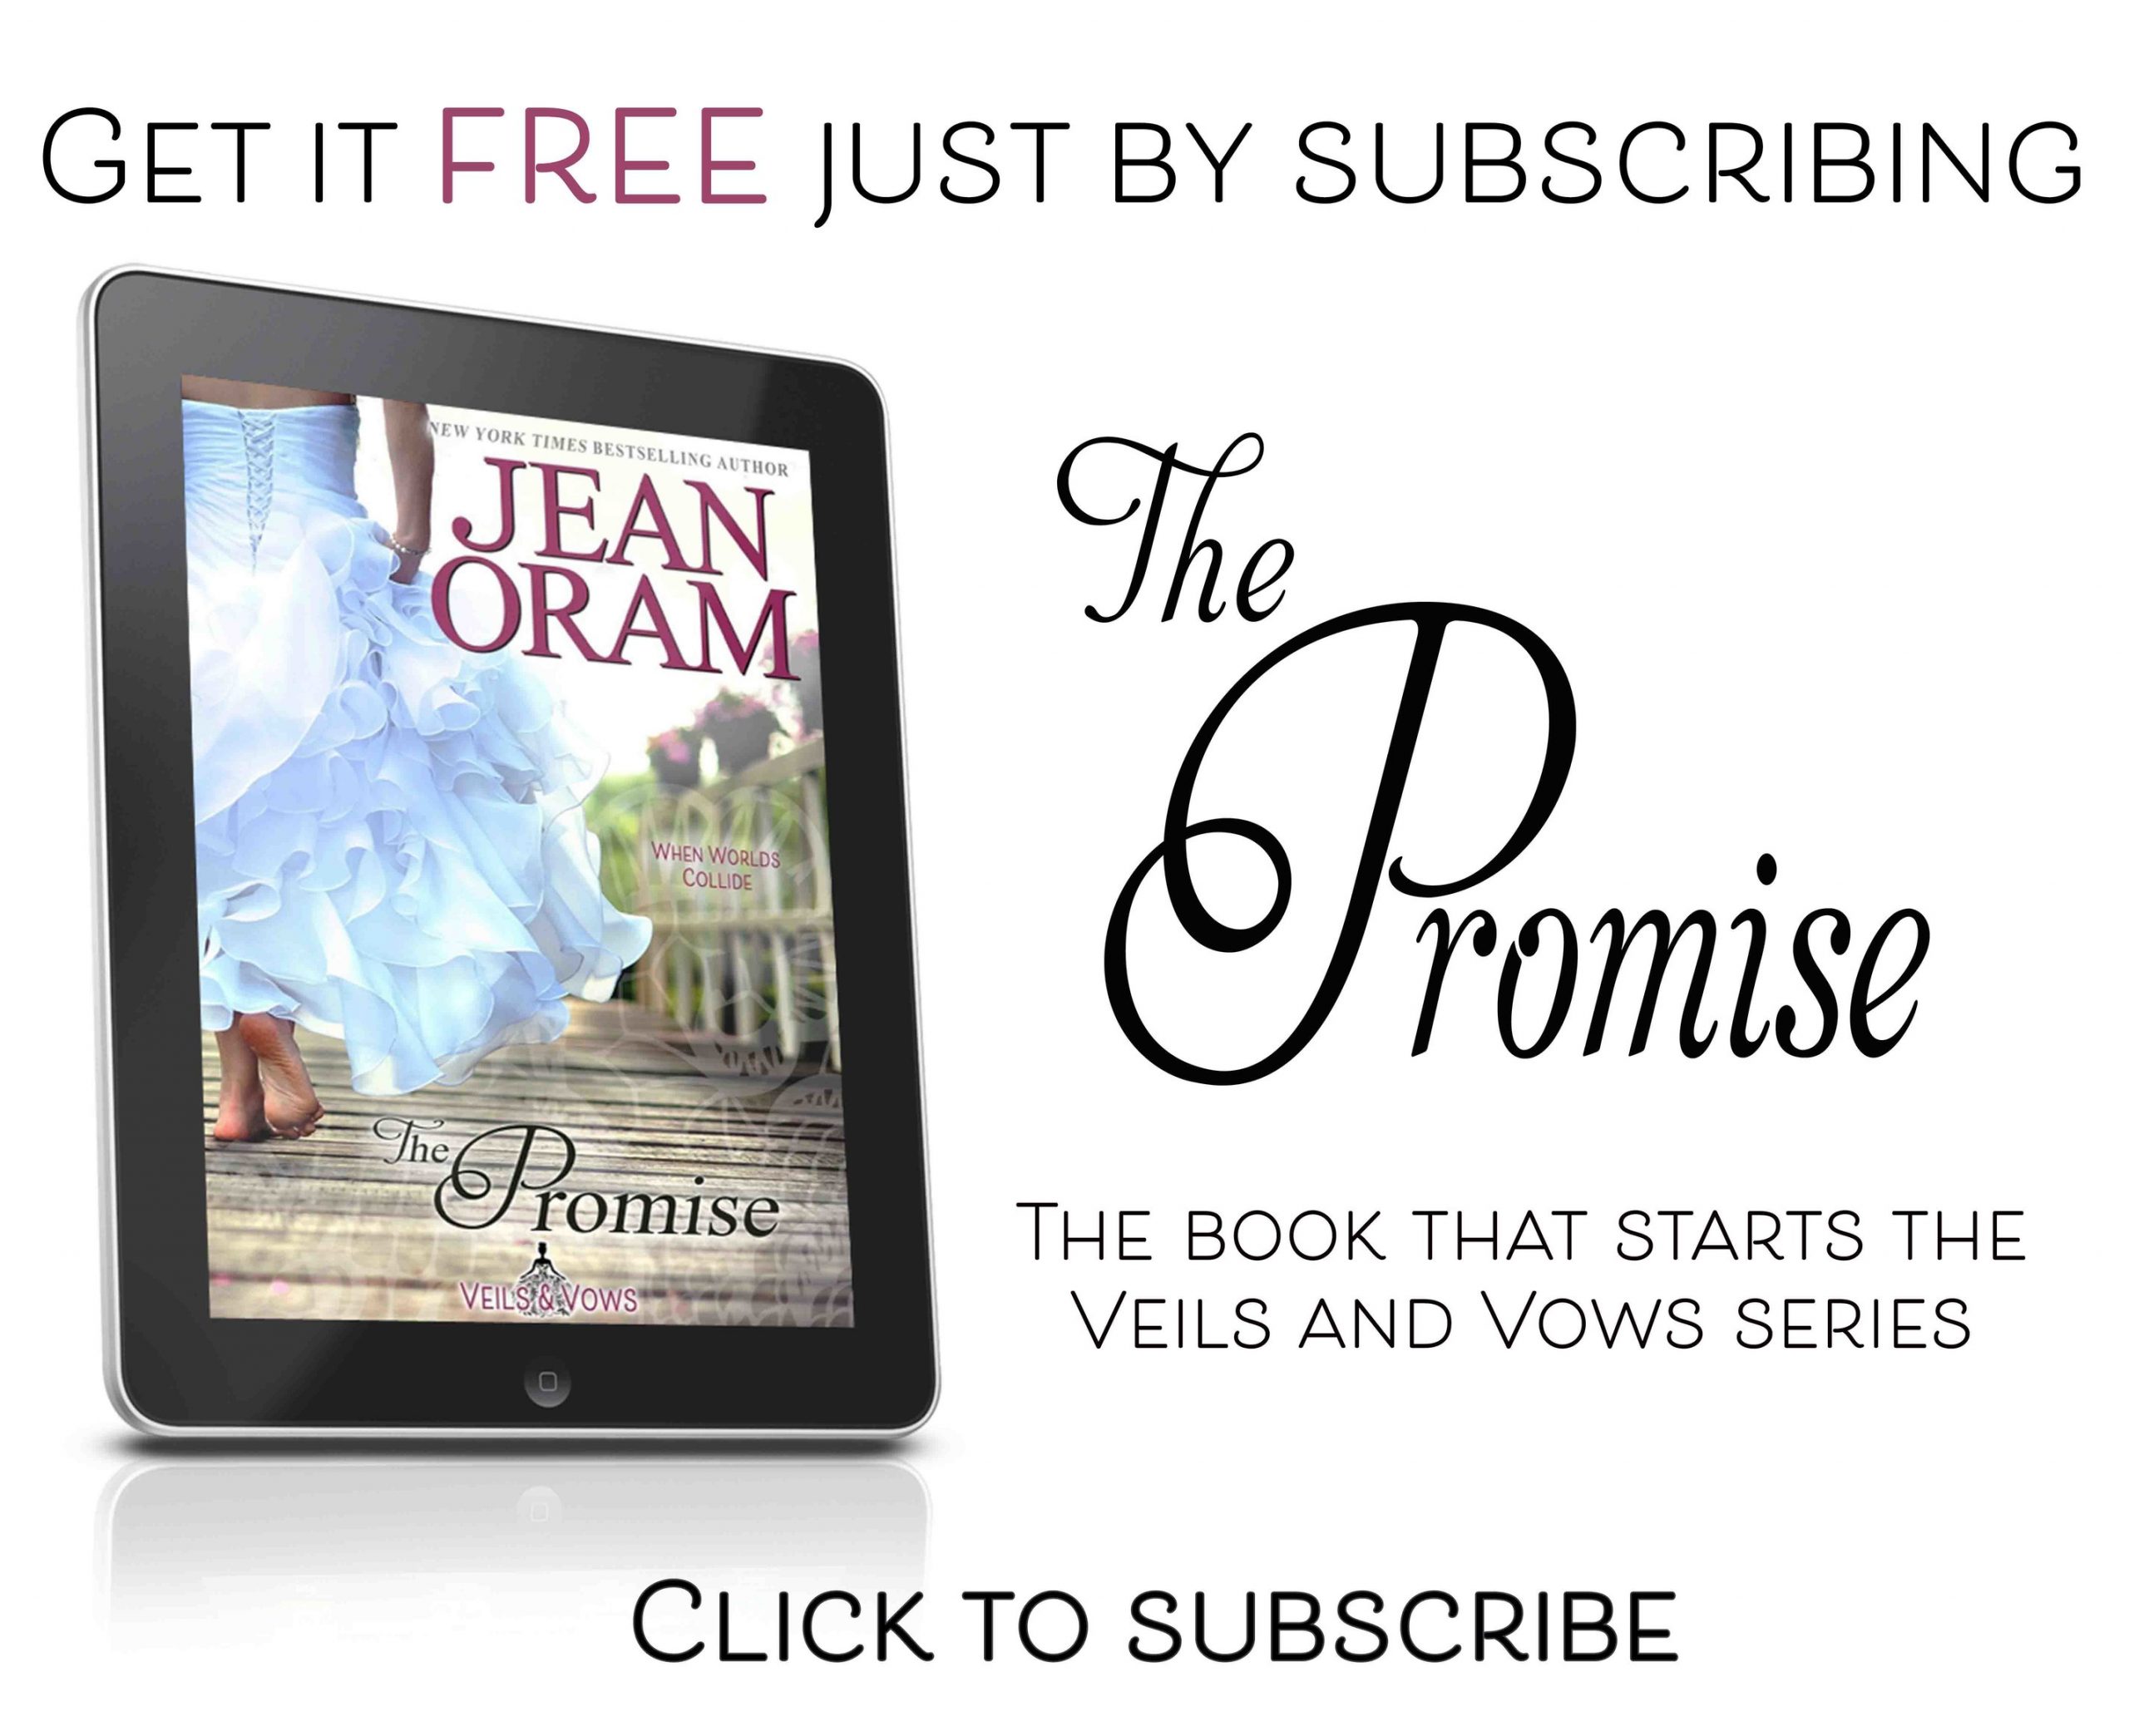 subscribe for a free book from Jean Oram